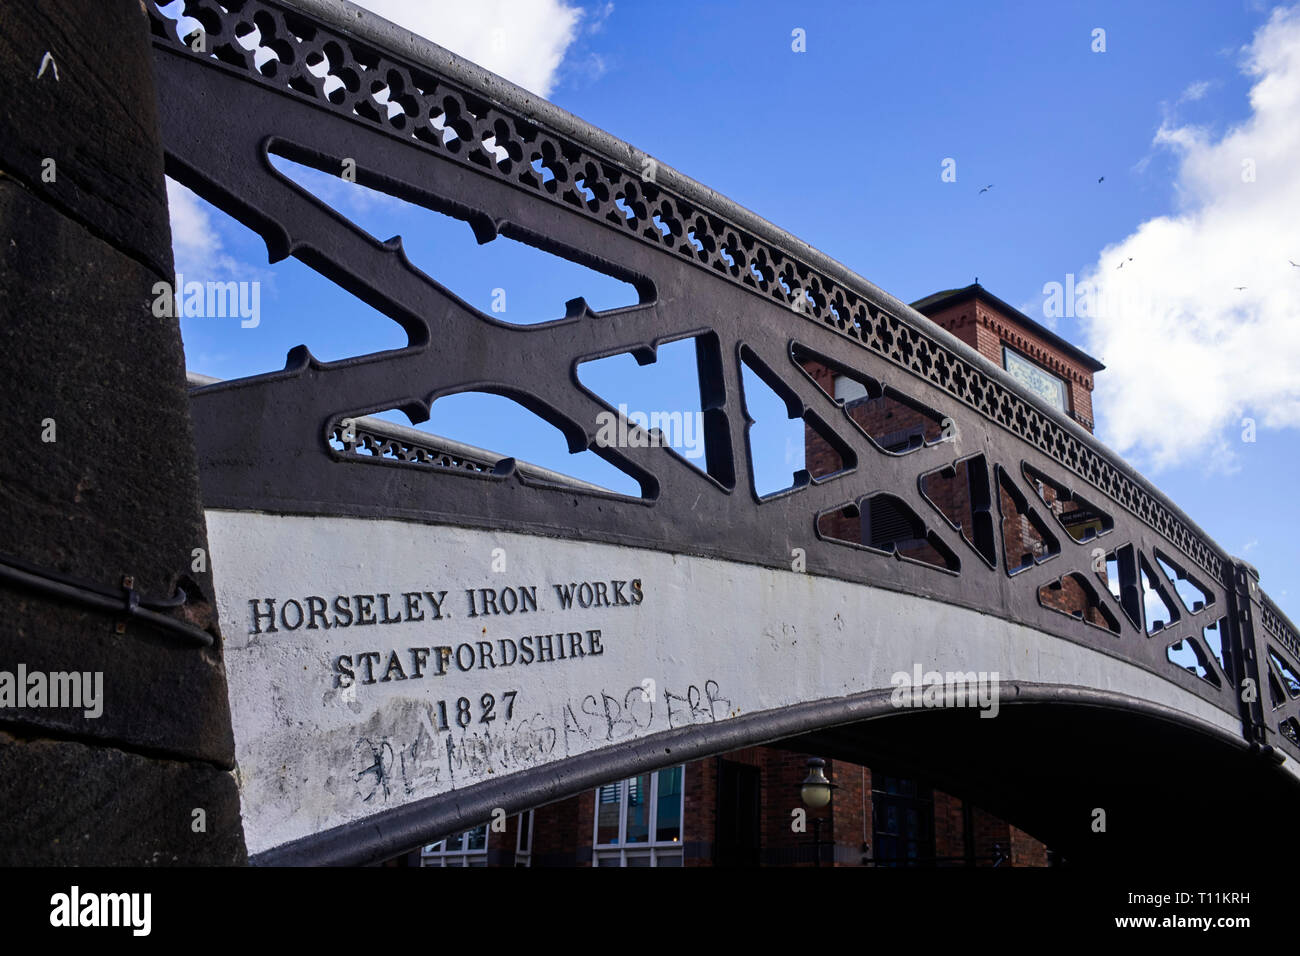 Tindal ponte in BCN costruito da Horseley Iron Works, Staffordshire 1827 Foto Stock